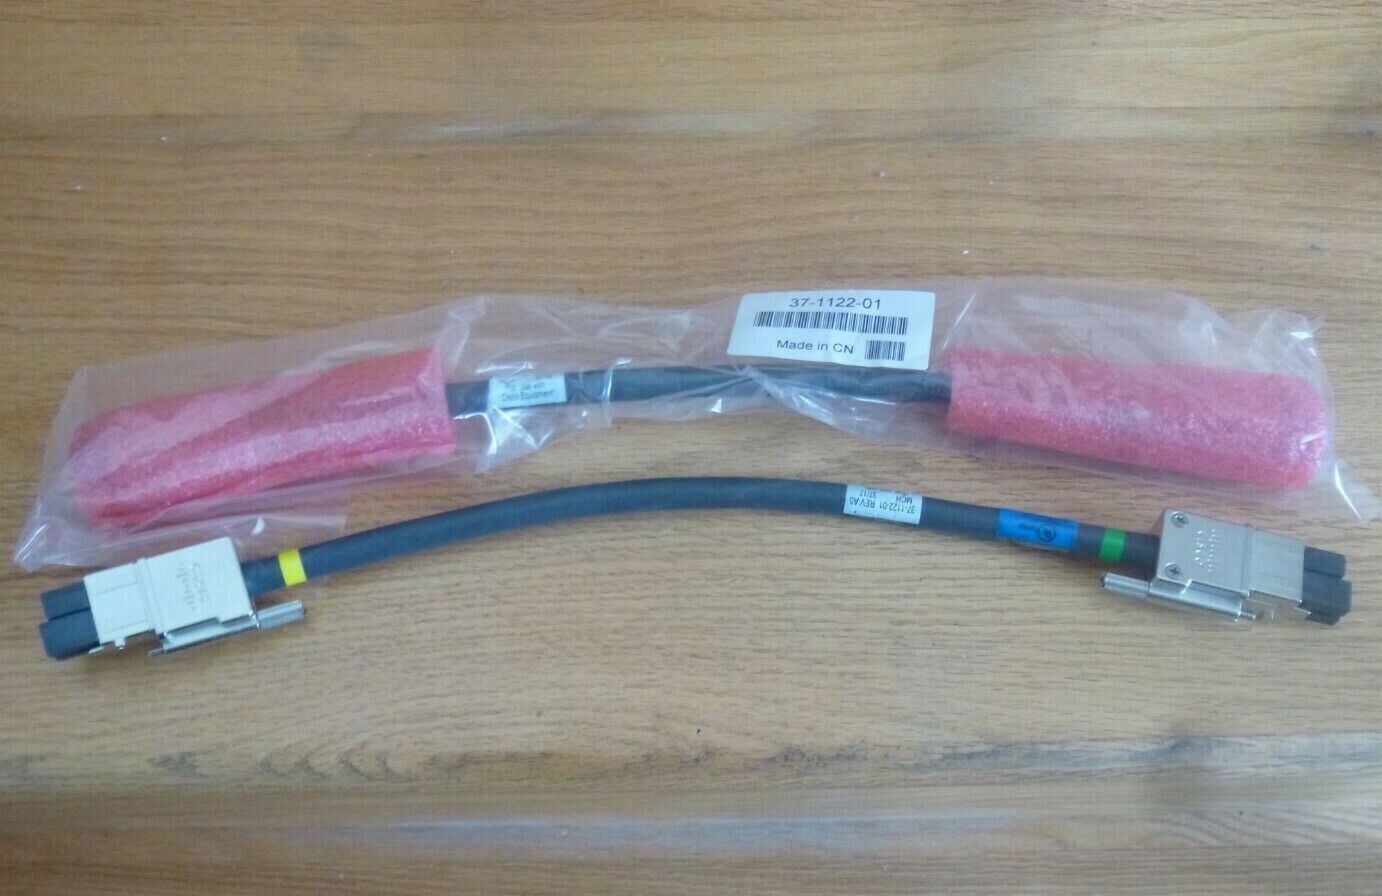 Lot 2x Cisco Power Stack 30CM Cable for Catalyst 3750x P/N: 37-1122-01